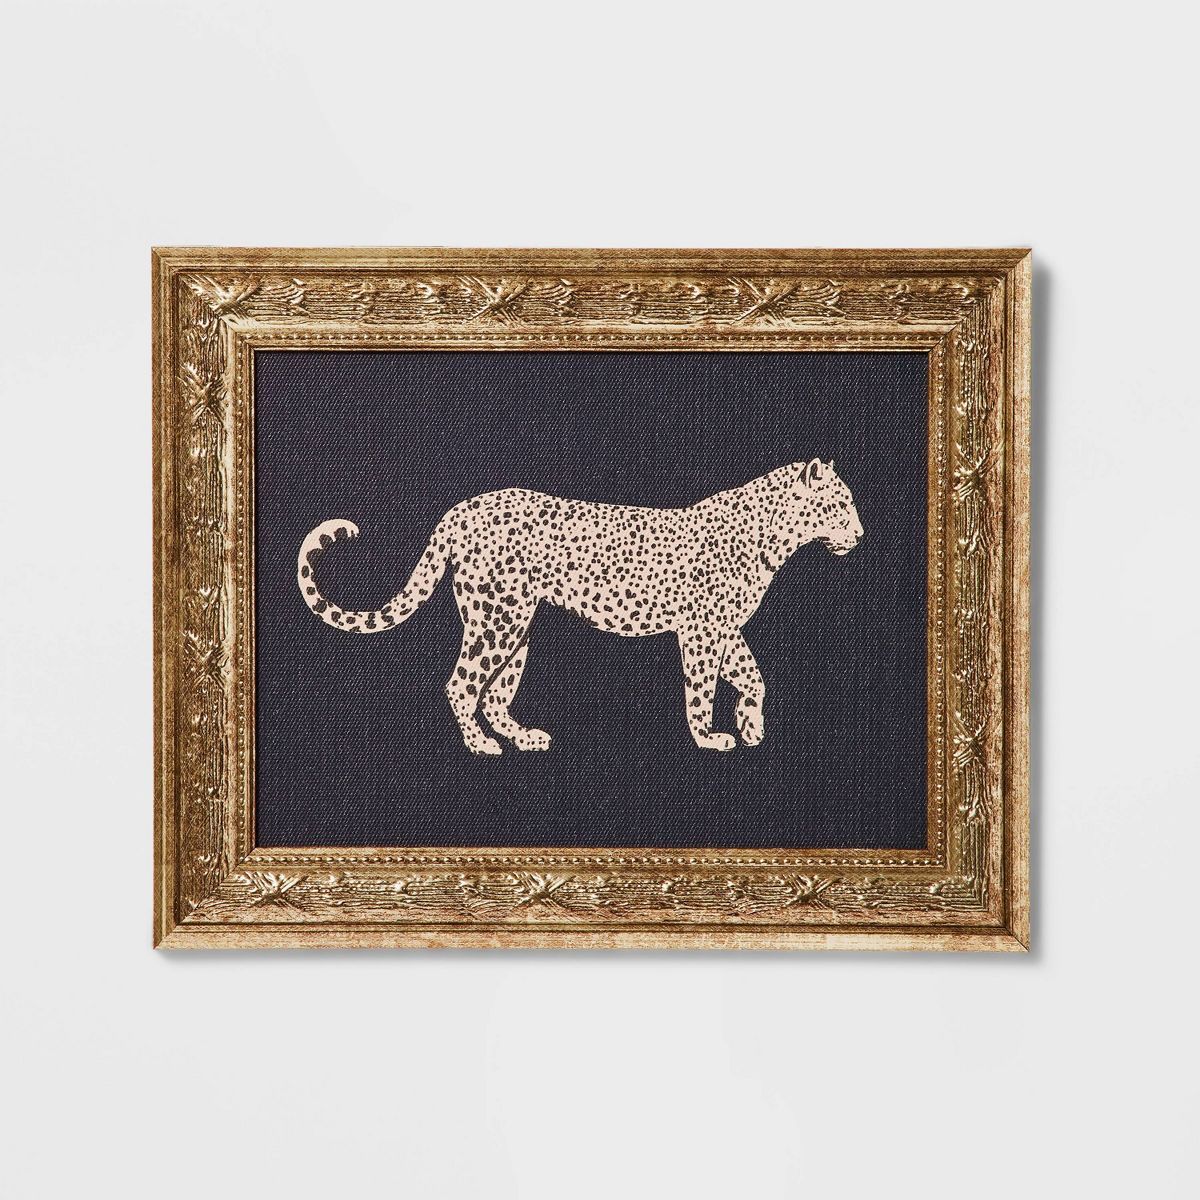 10" x 8" Cheetah Framed Wall Art Canvas - Threshold™ designed with Studio McGee | Target